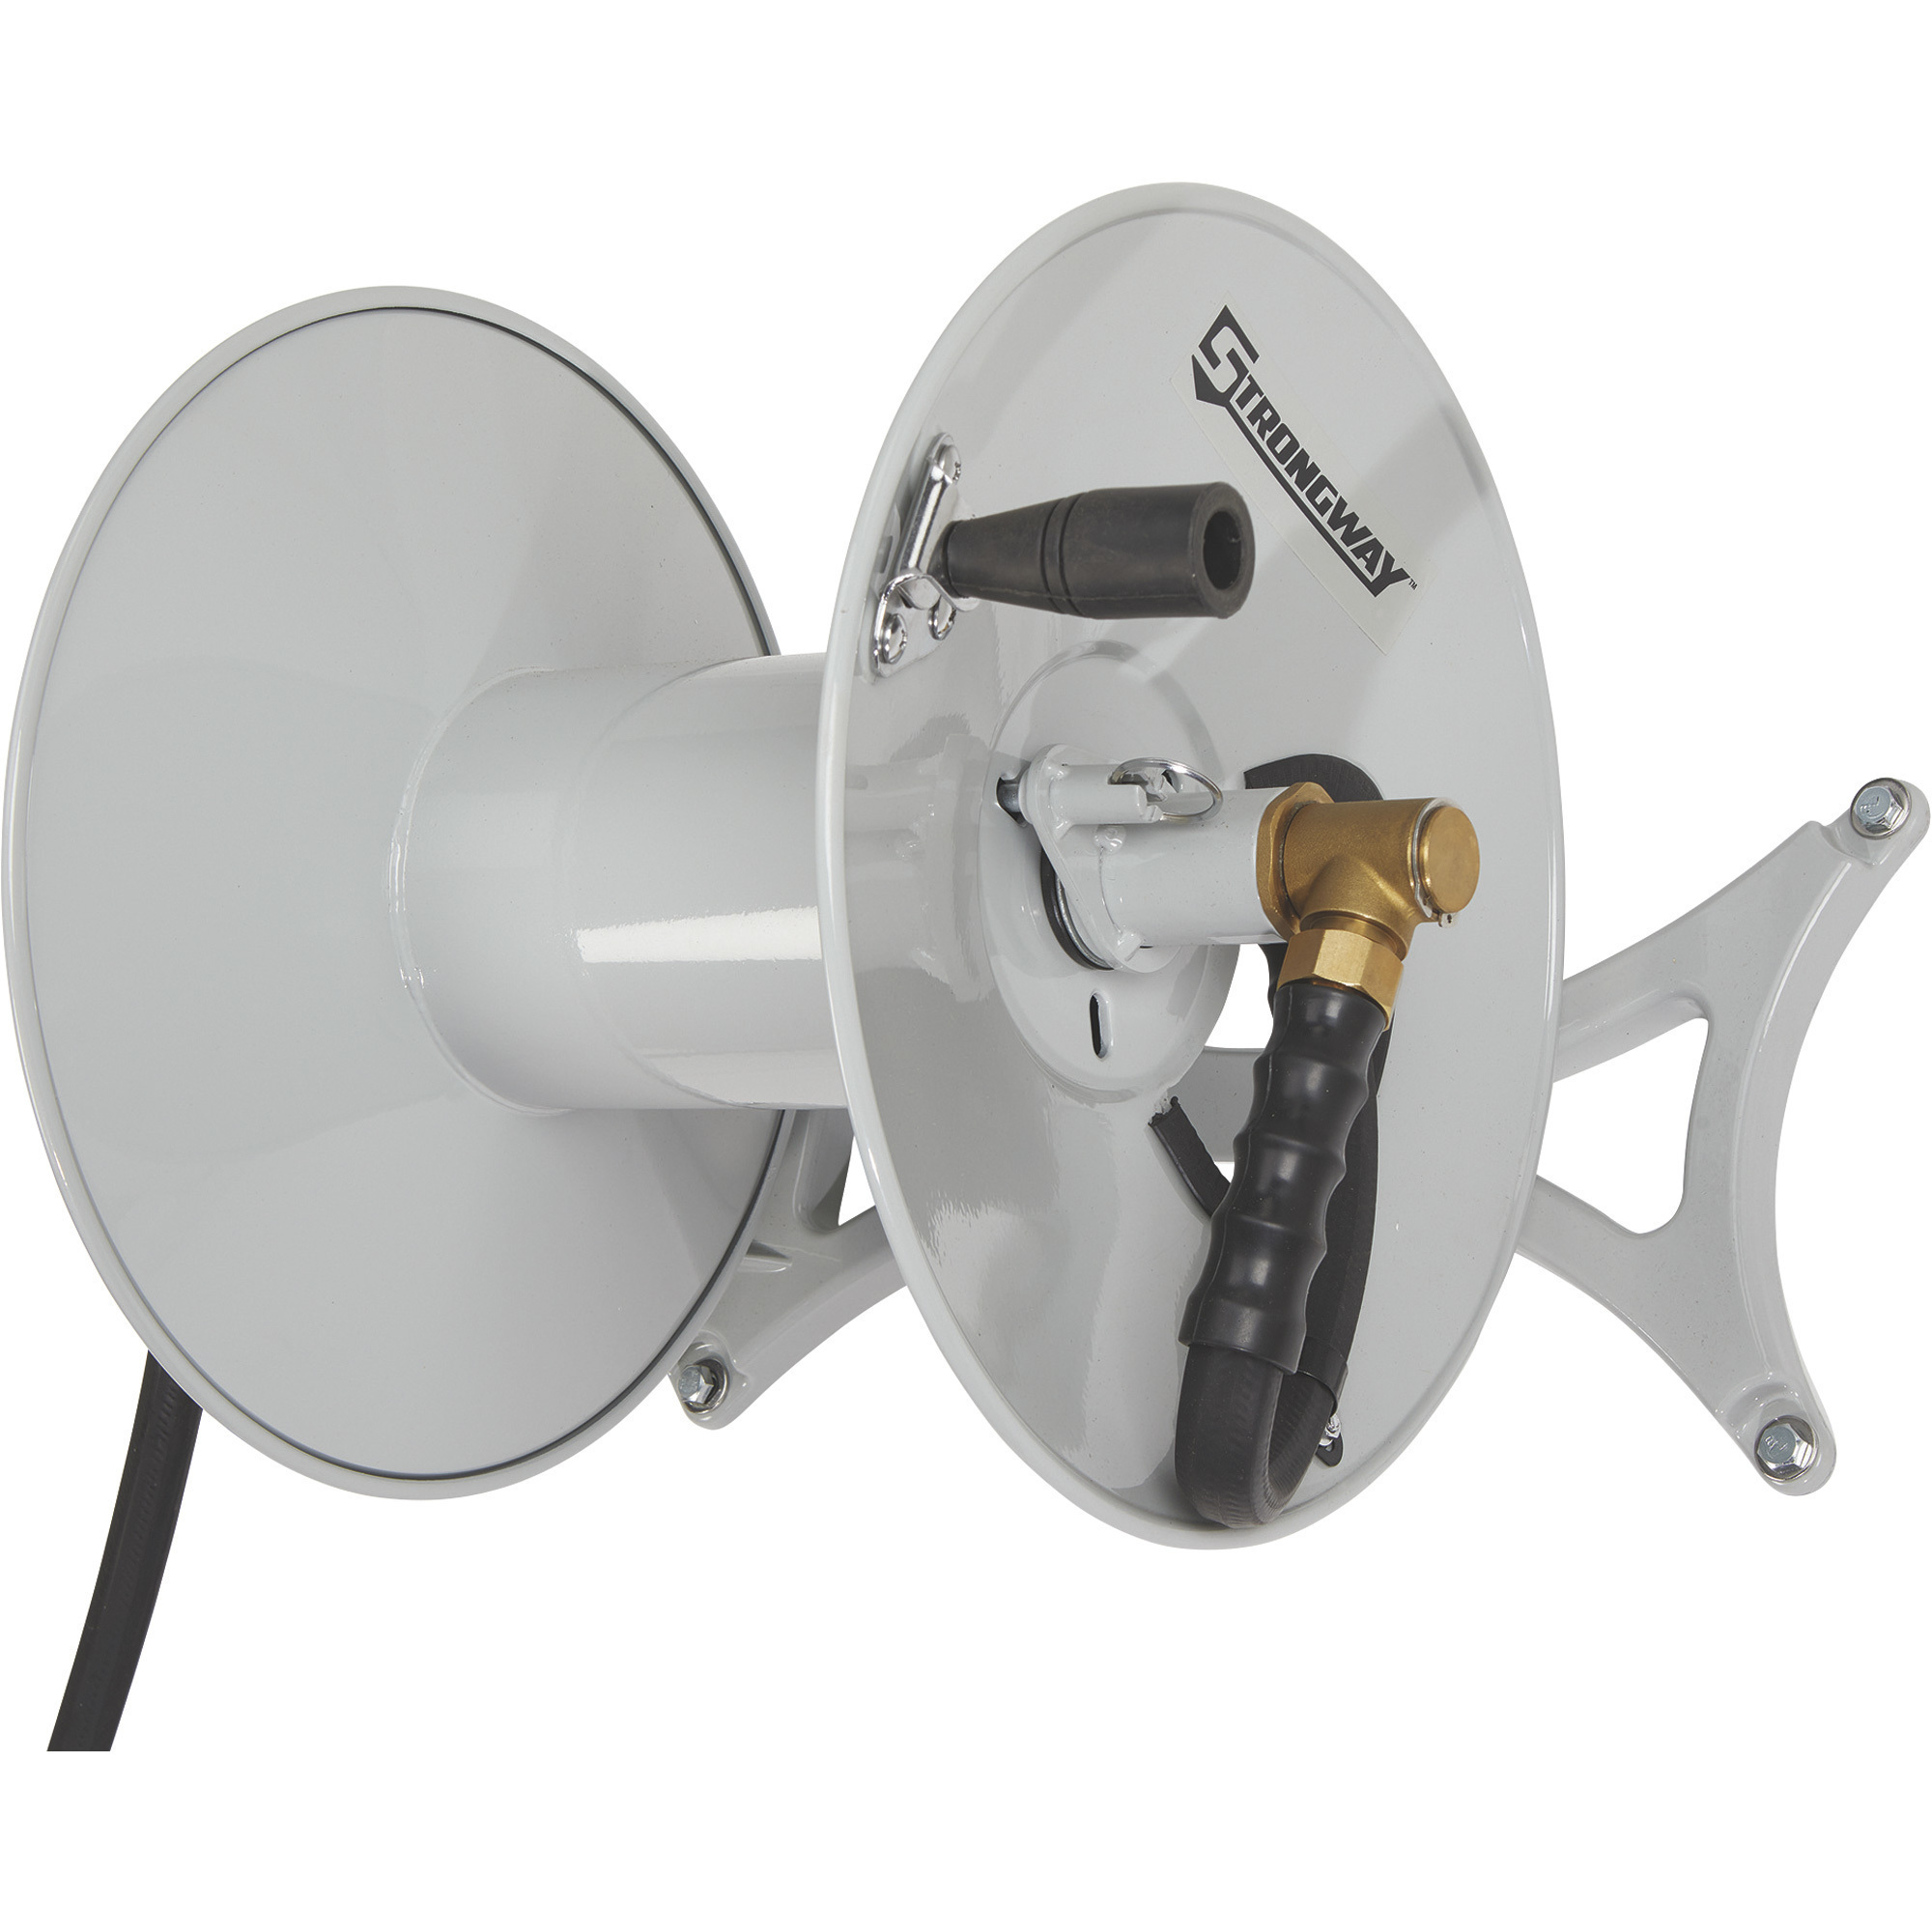 Strongway Wall-Mount Hose Reel with 6ft. Lead-In Hose, Holds 5/8Inch x 150ft. Hose